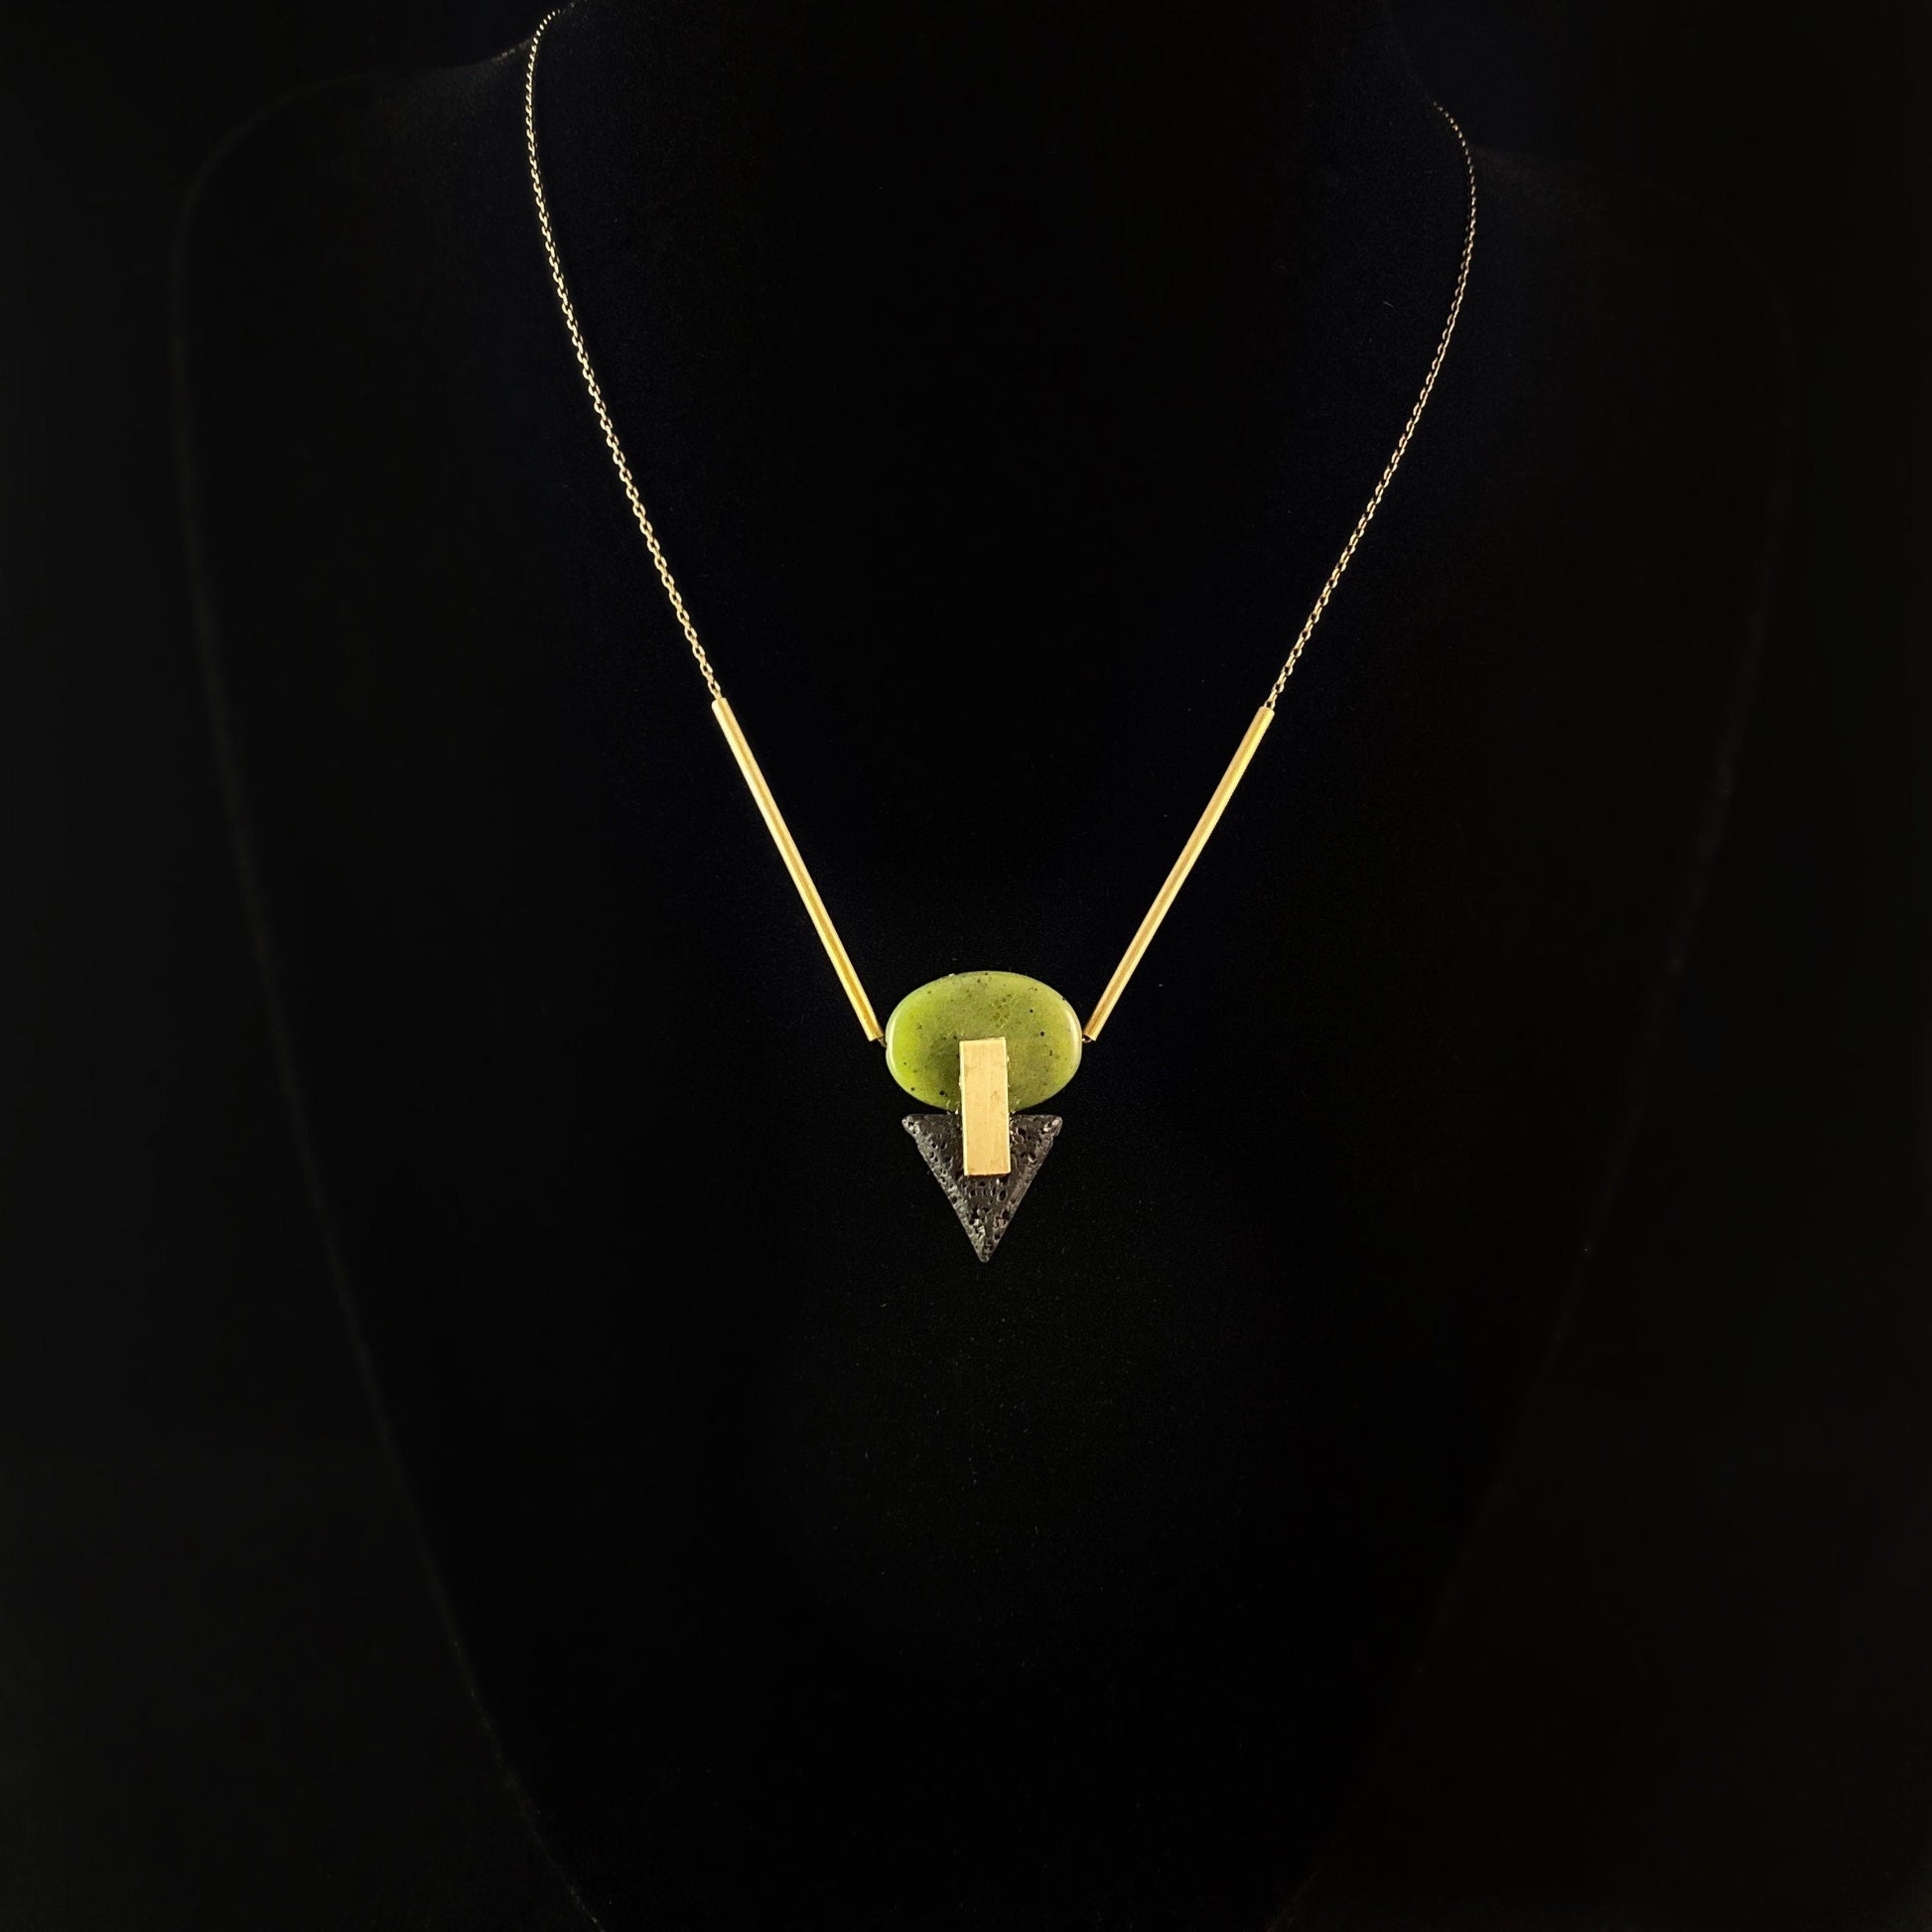 Gold Geometric Art Deco Pendant Necklace - Jade and Lava Stone Necklace with 18kt Gold Plated Detailing, David Aubrey Jewelry